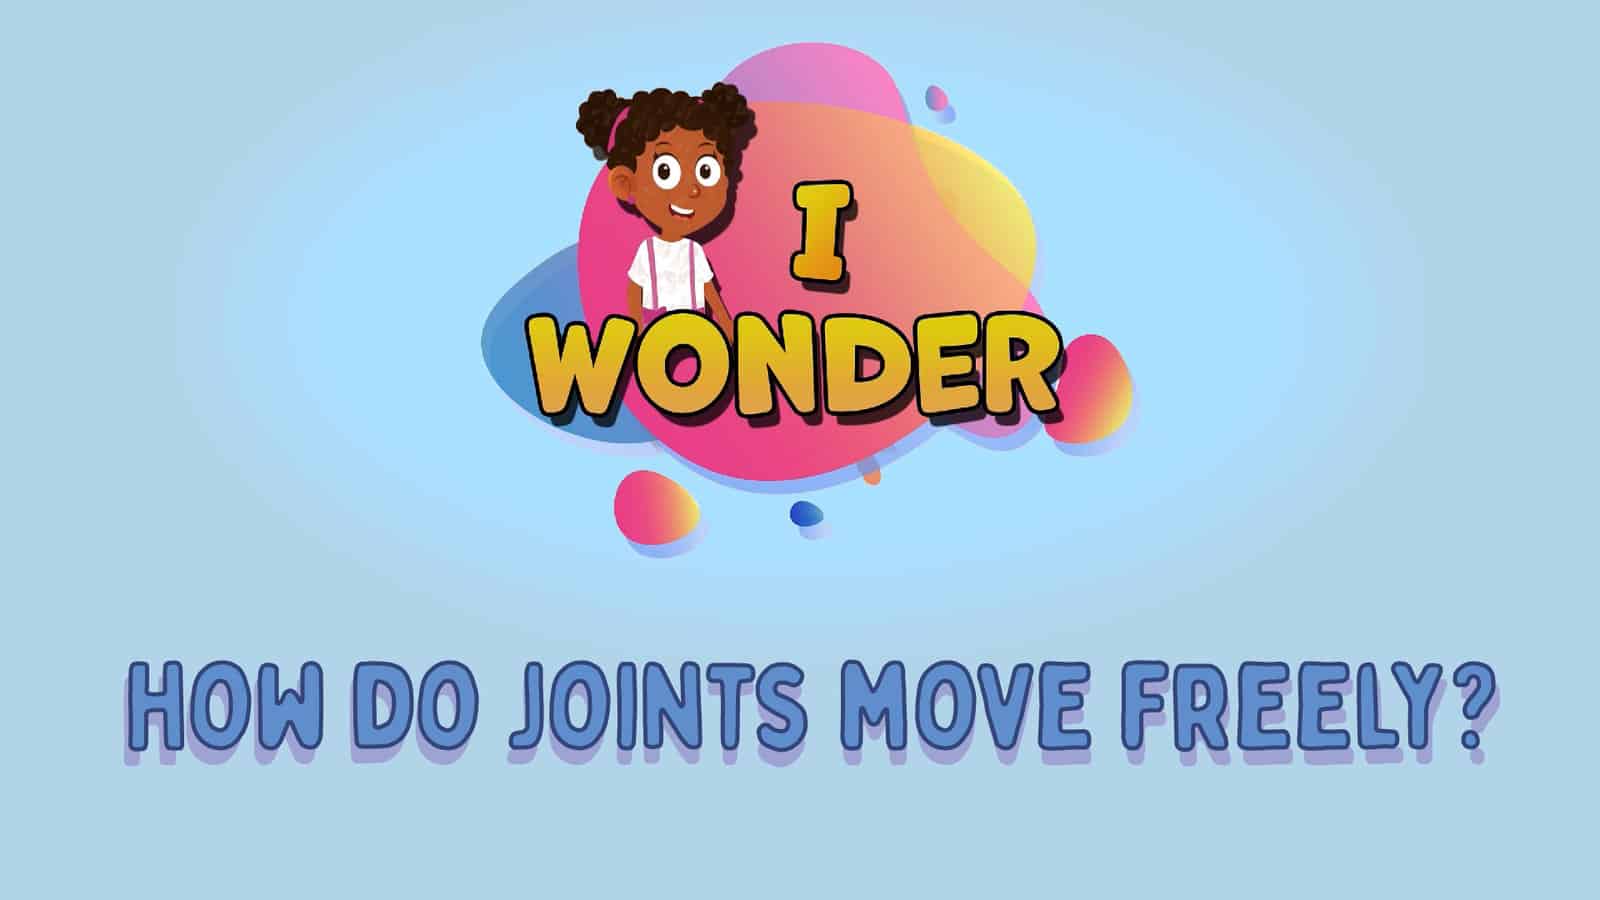 How Do Joints Move Freely?